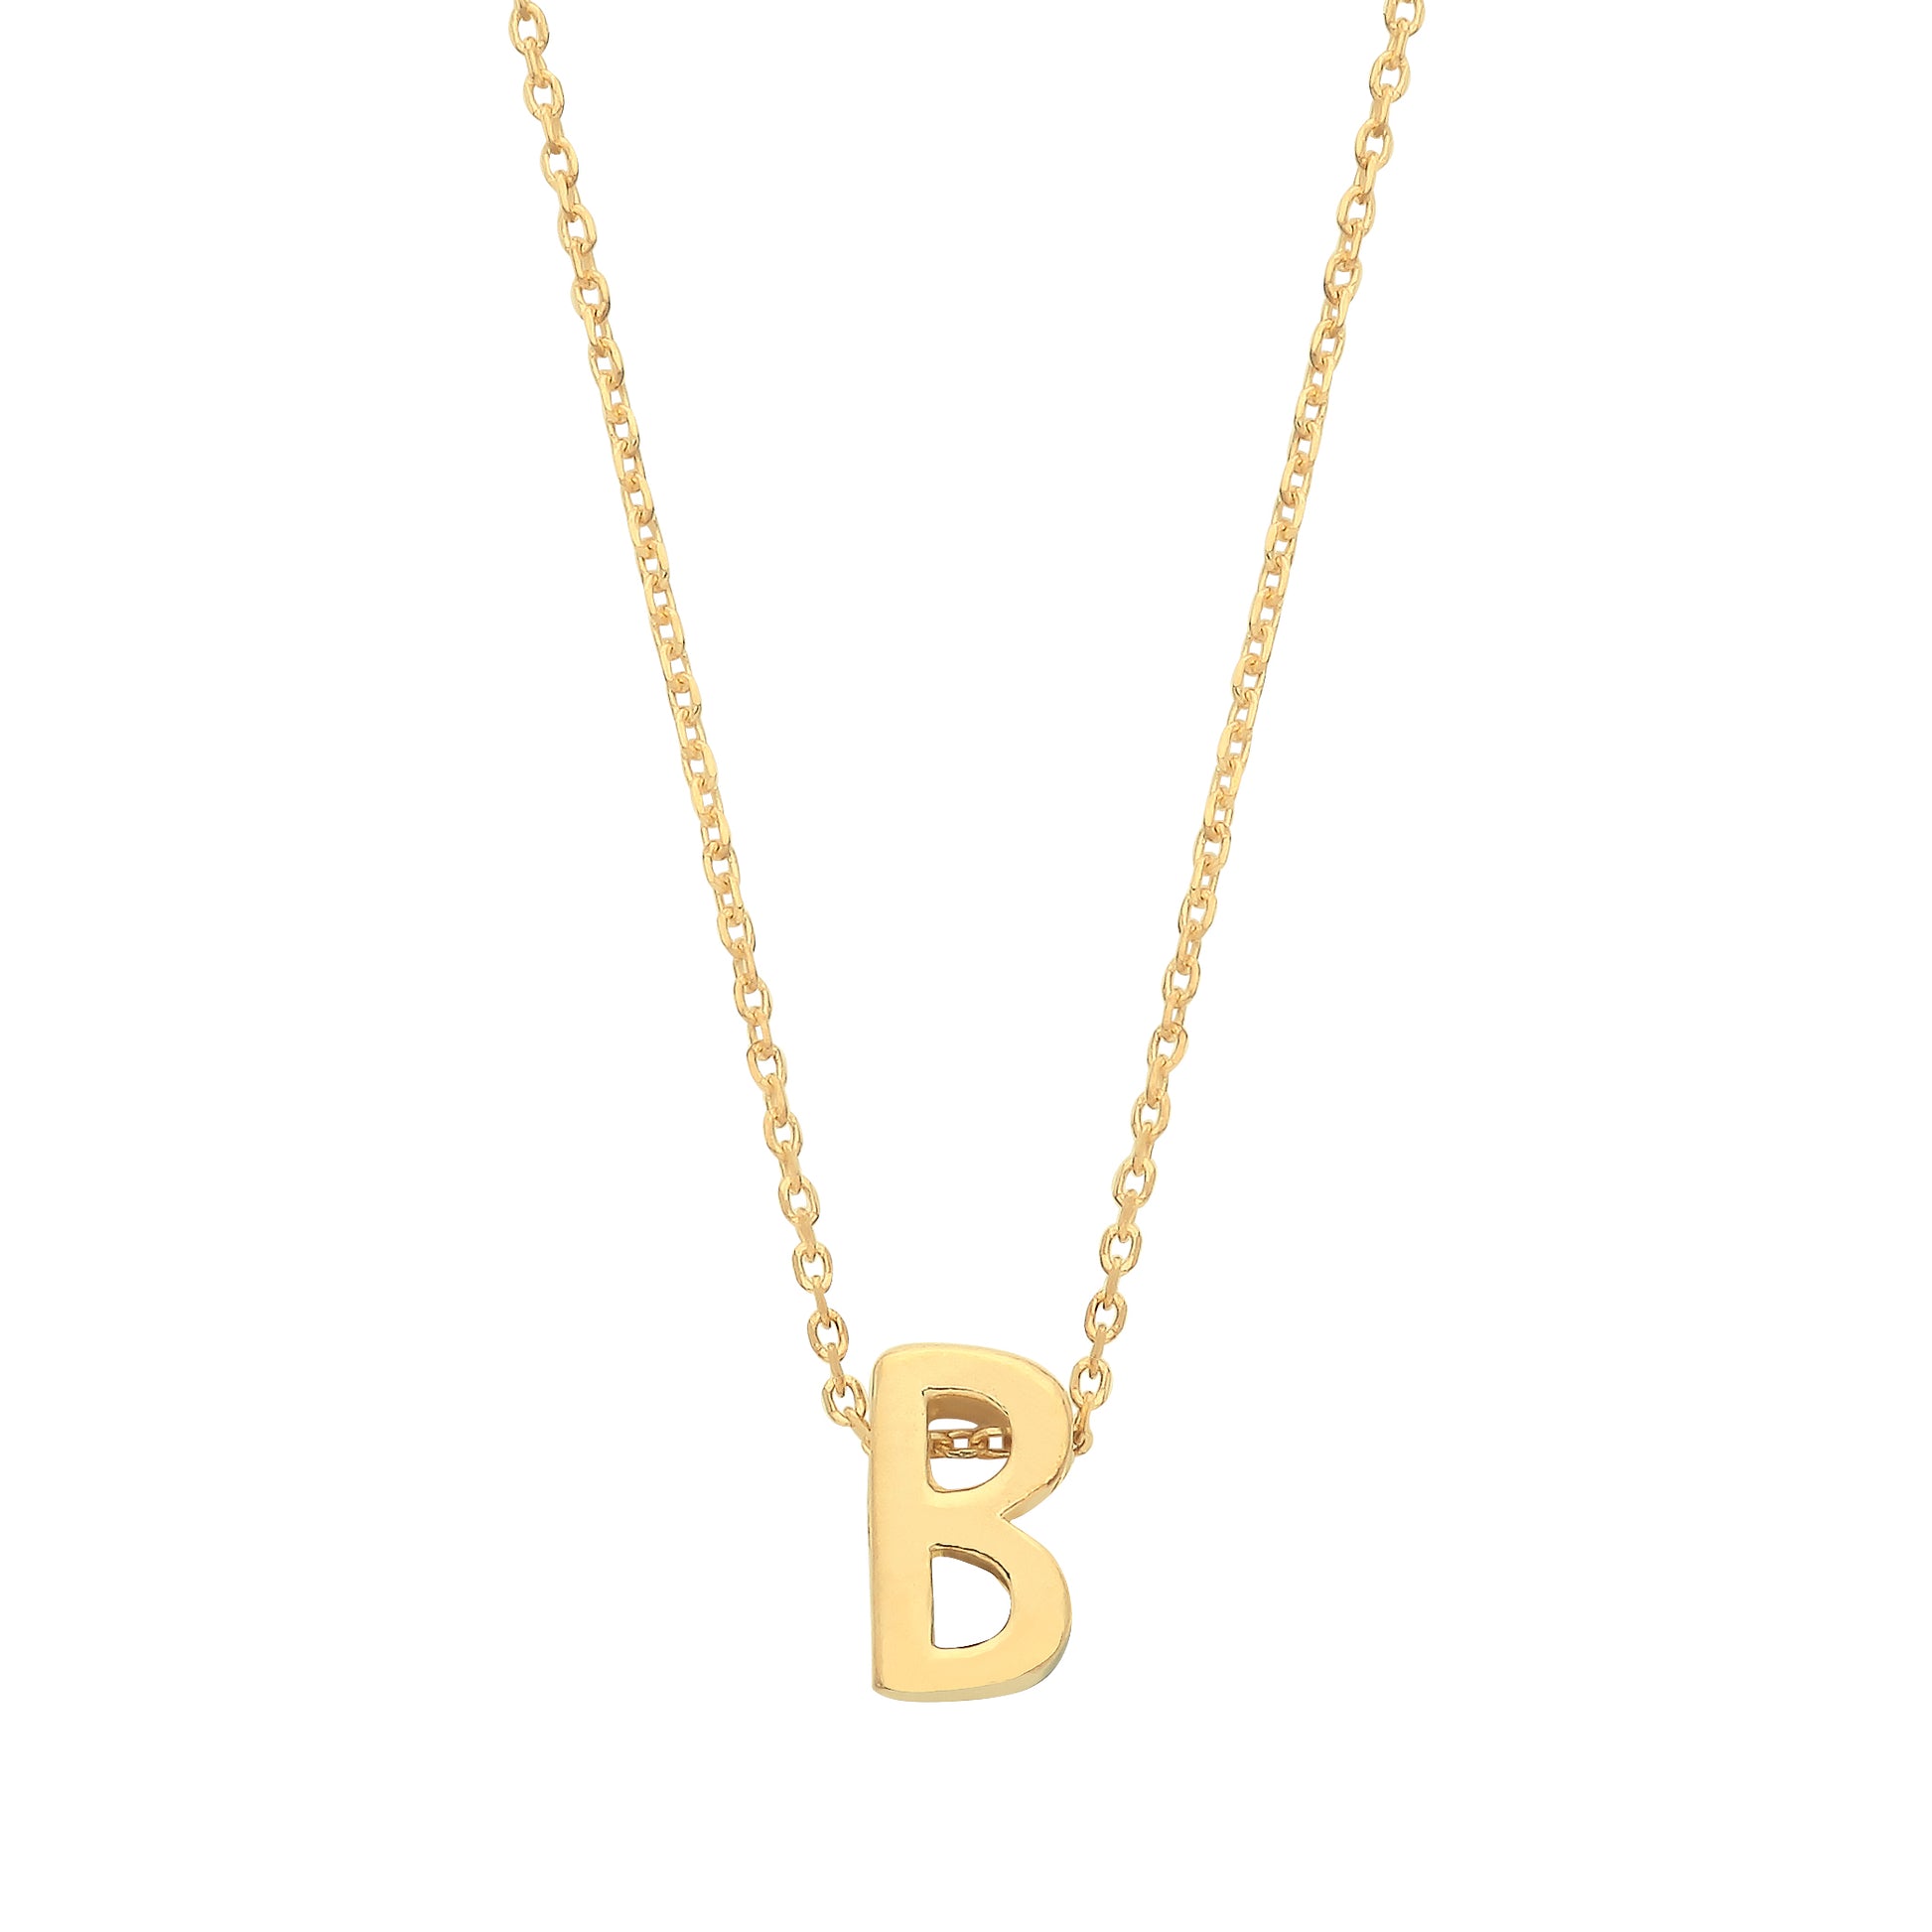 9ct Gold  Letter B Initial Pendant Necklace 17 inch 43cm - G9P6032B